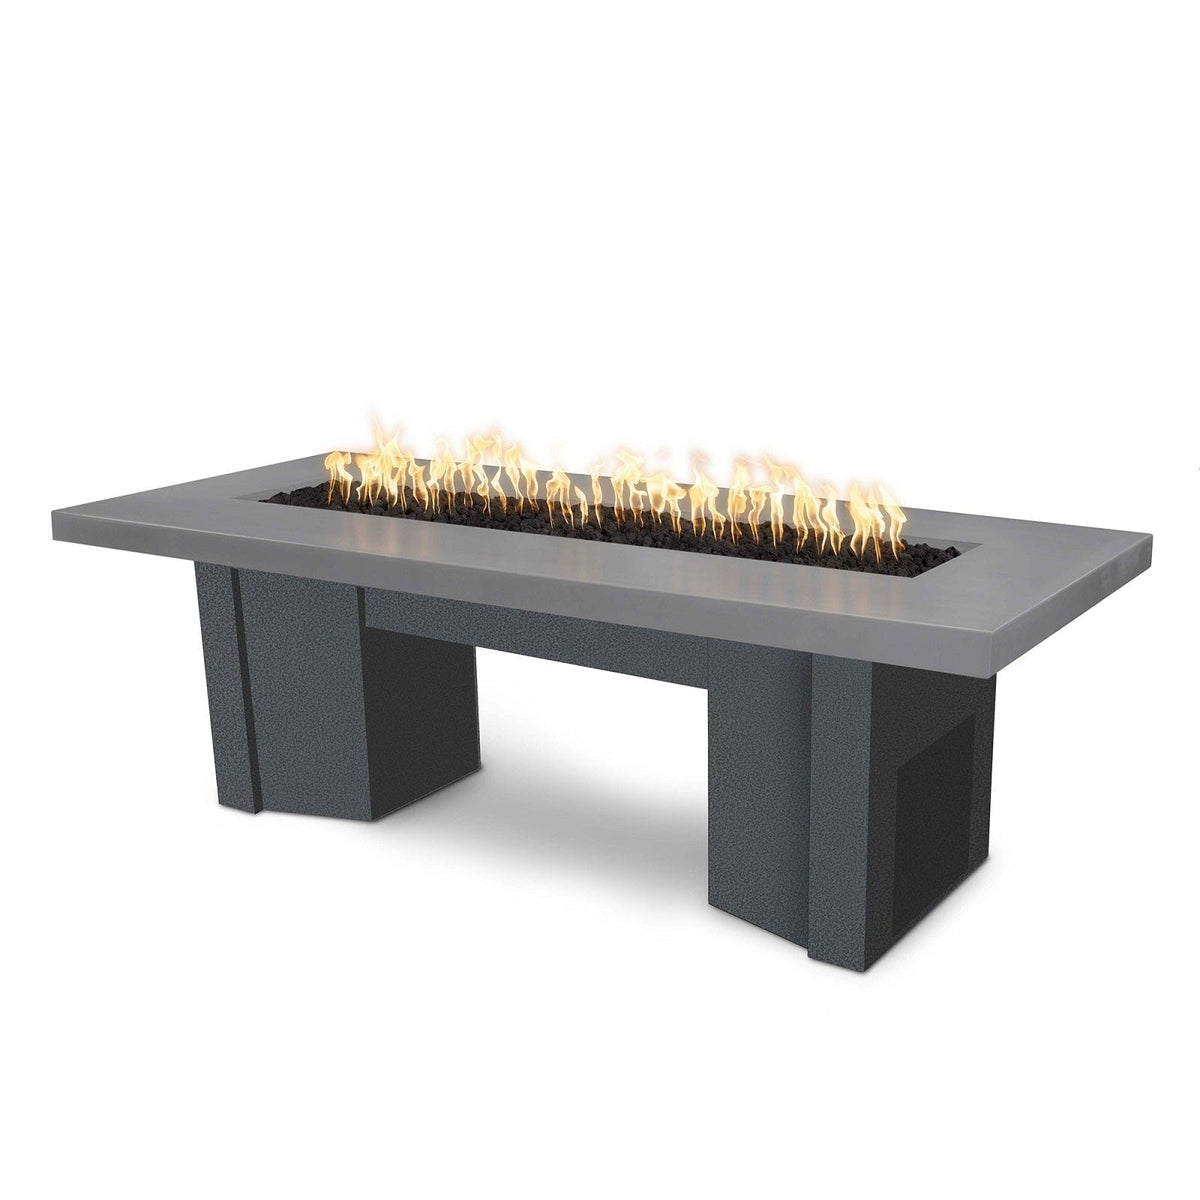 The Outdoor Plus Fire Features Natural Gray (-NGY) / Silver Vein Powder Coated Steel (-SLV) The Outdoor Plus 60&quot; Alameda Fire Table Smooth Concrete in Natural Gas - Match Lit with Flame Sense System / OPT-ALMGFRC60FSML-NG